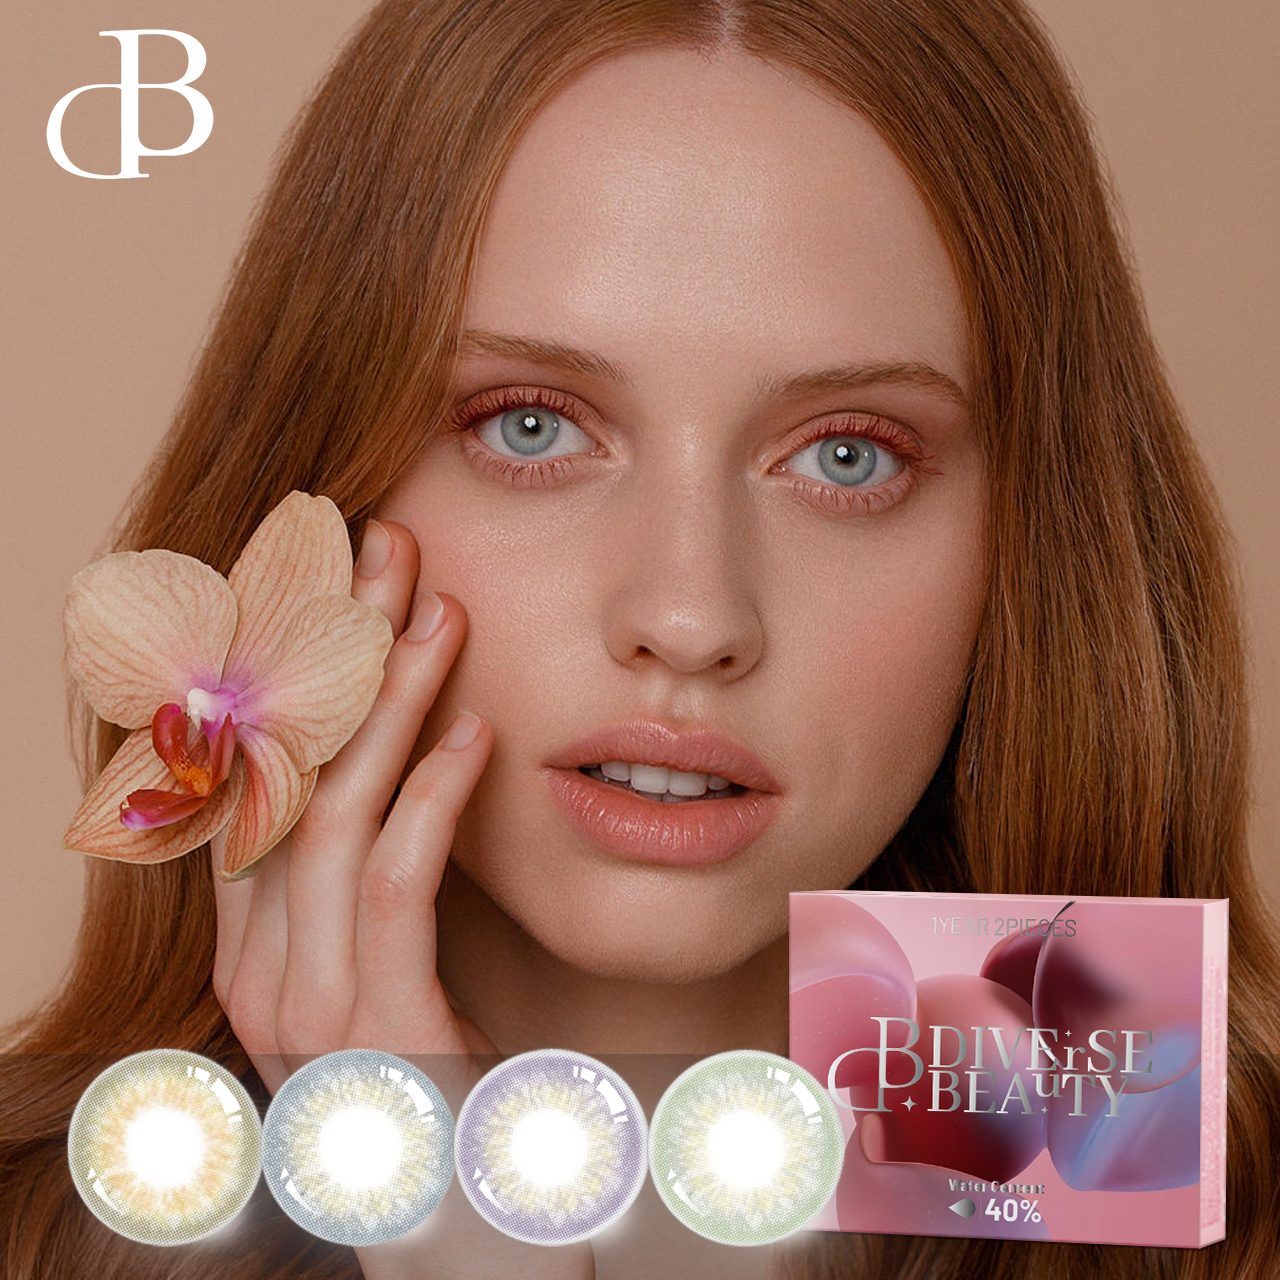 dbeyes fancylook colored contact lens cosmetic